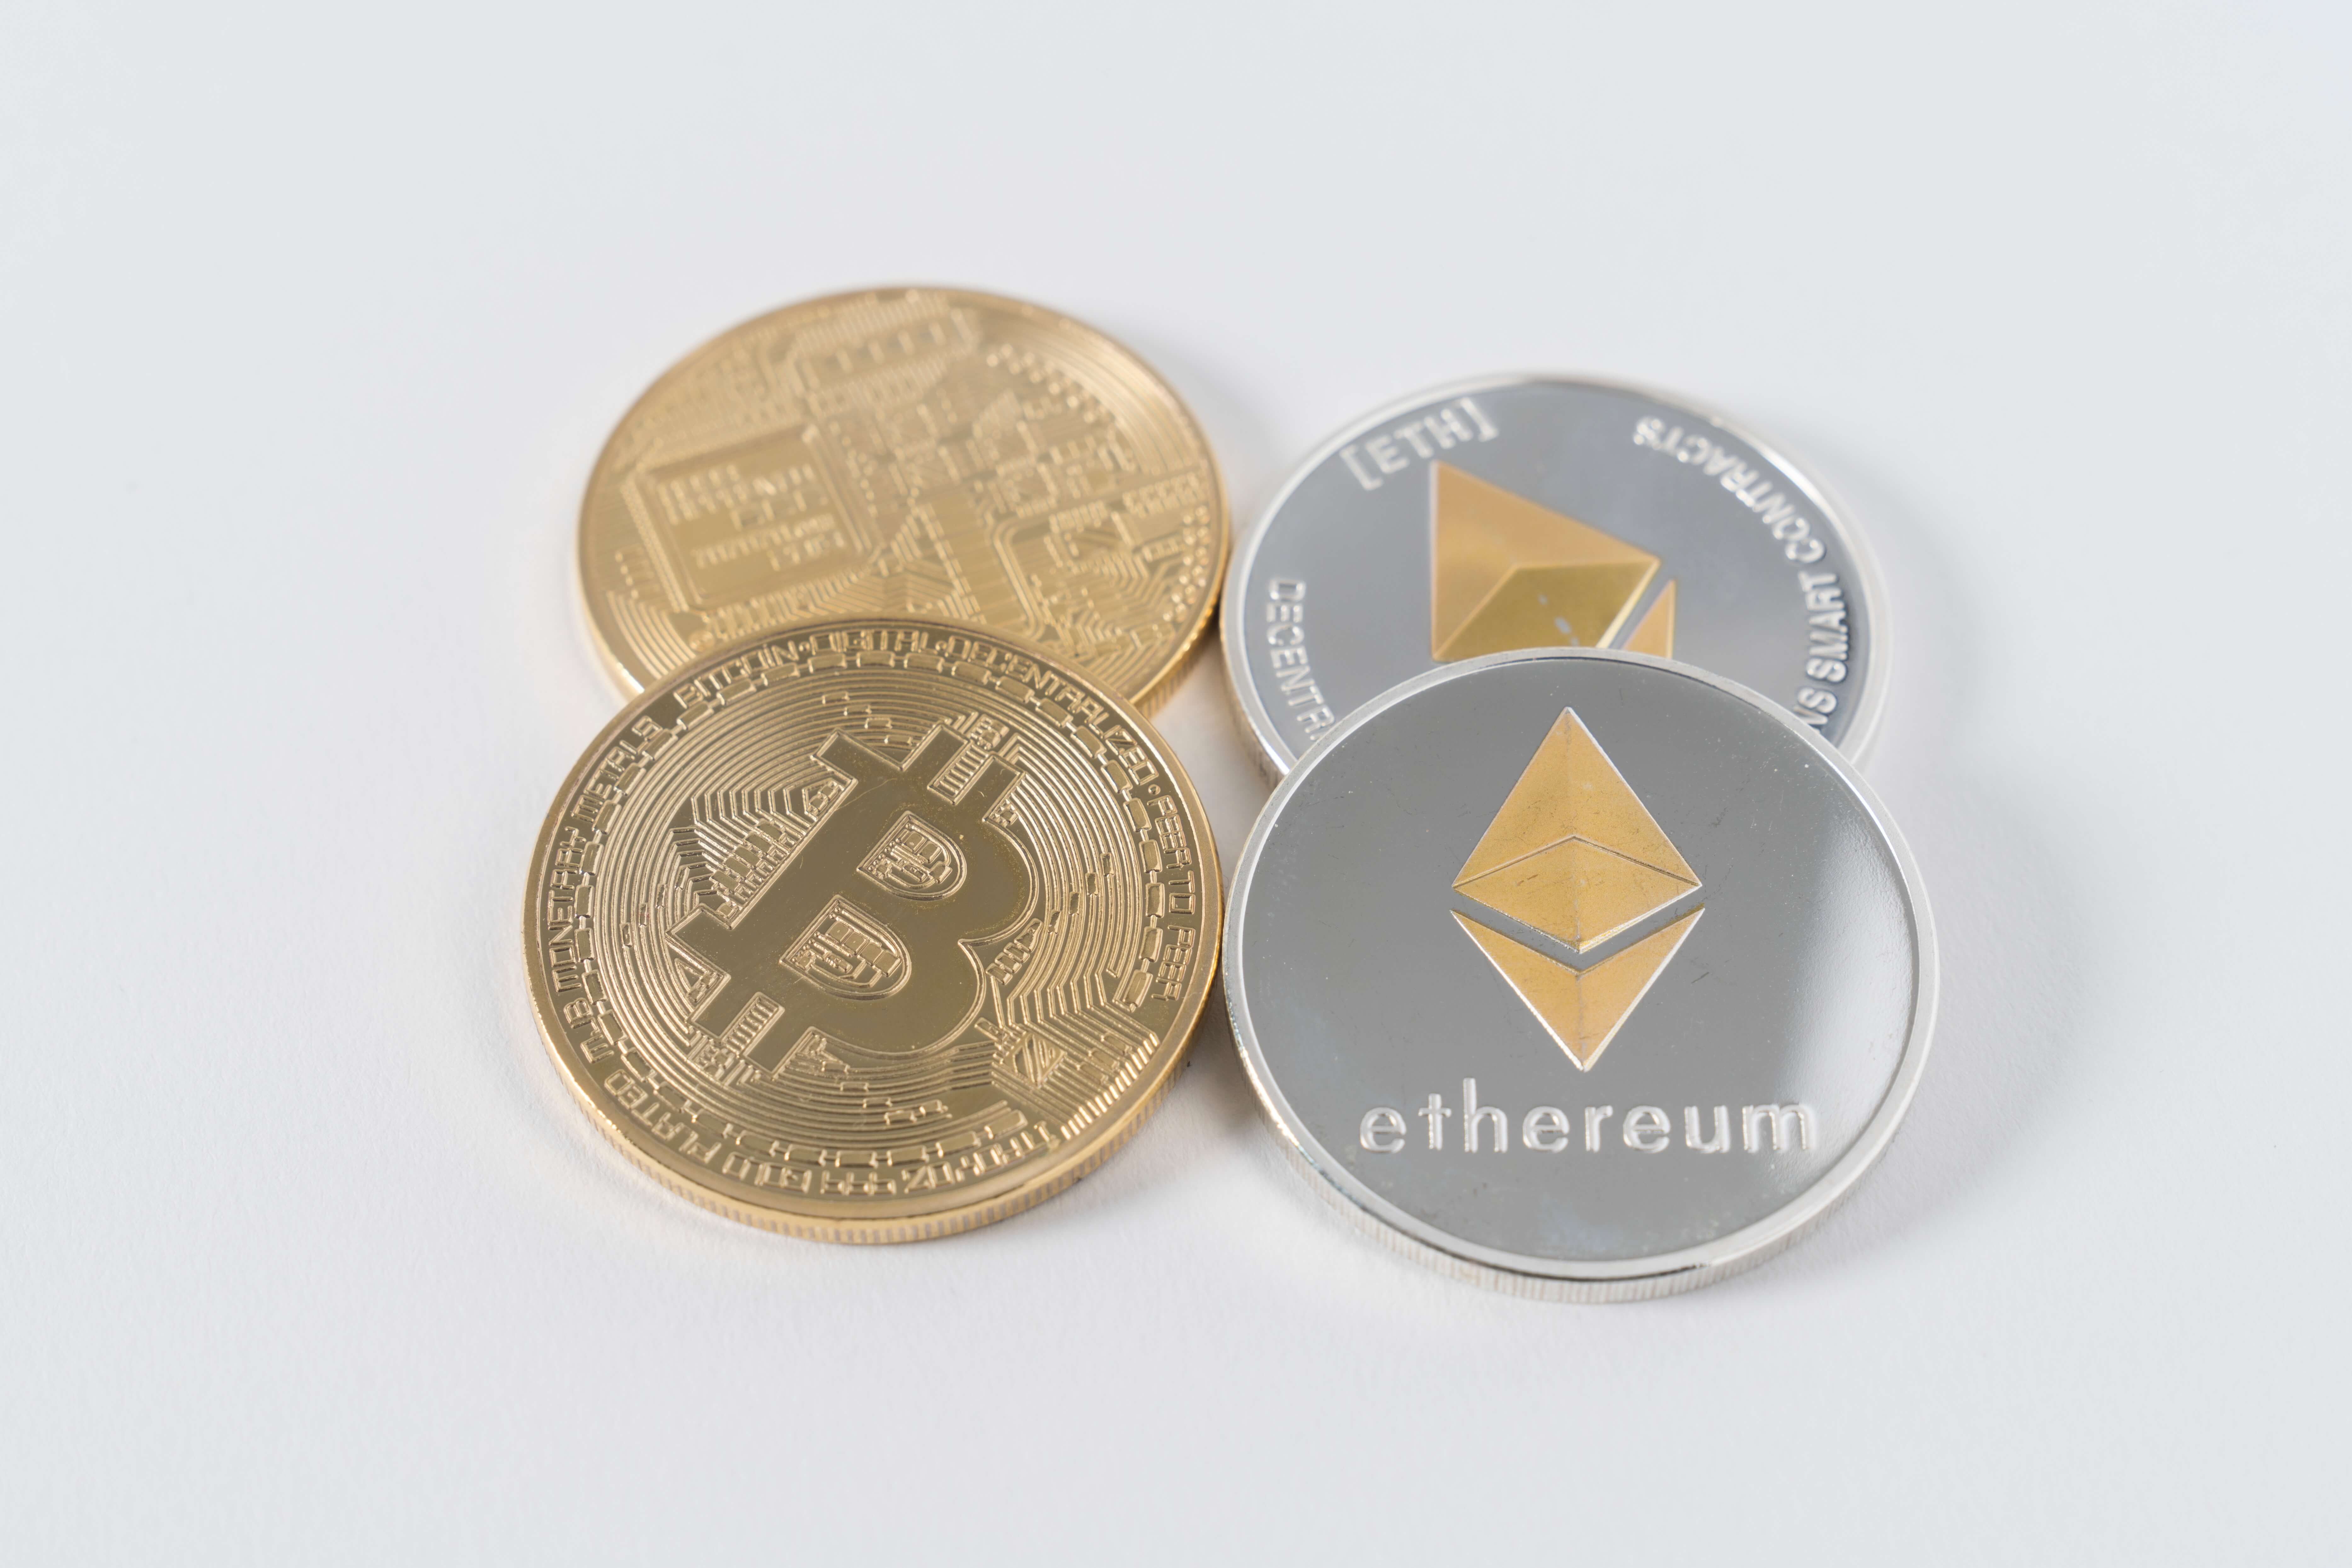 Picture of bitcoin and ethereum coins